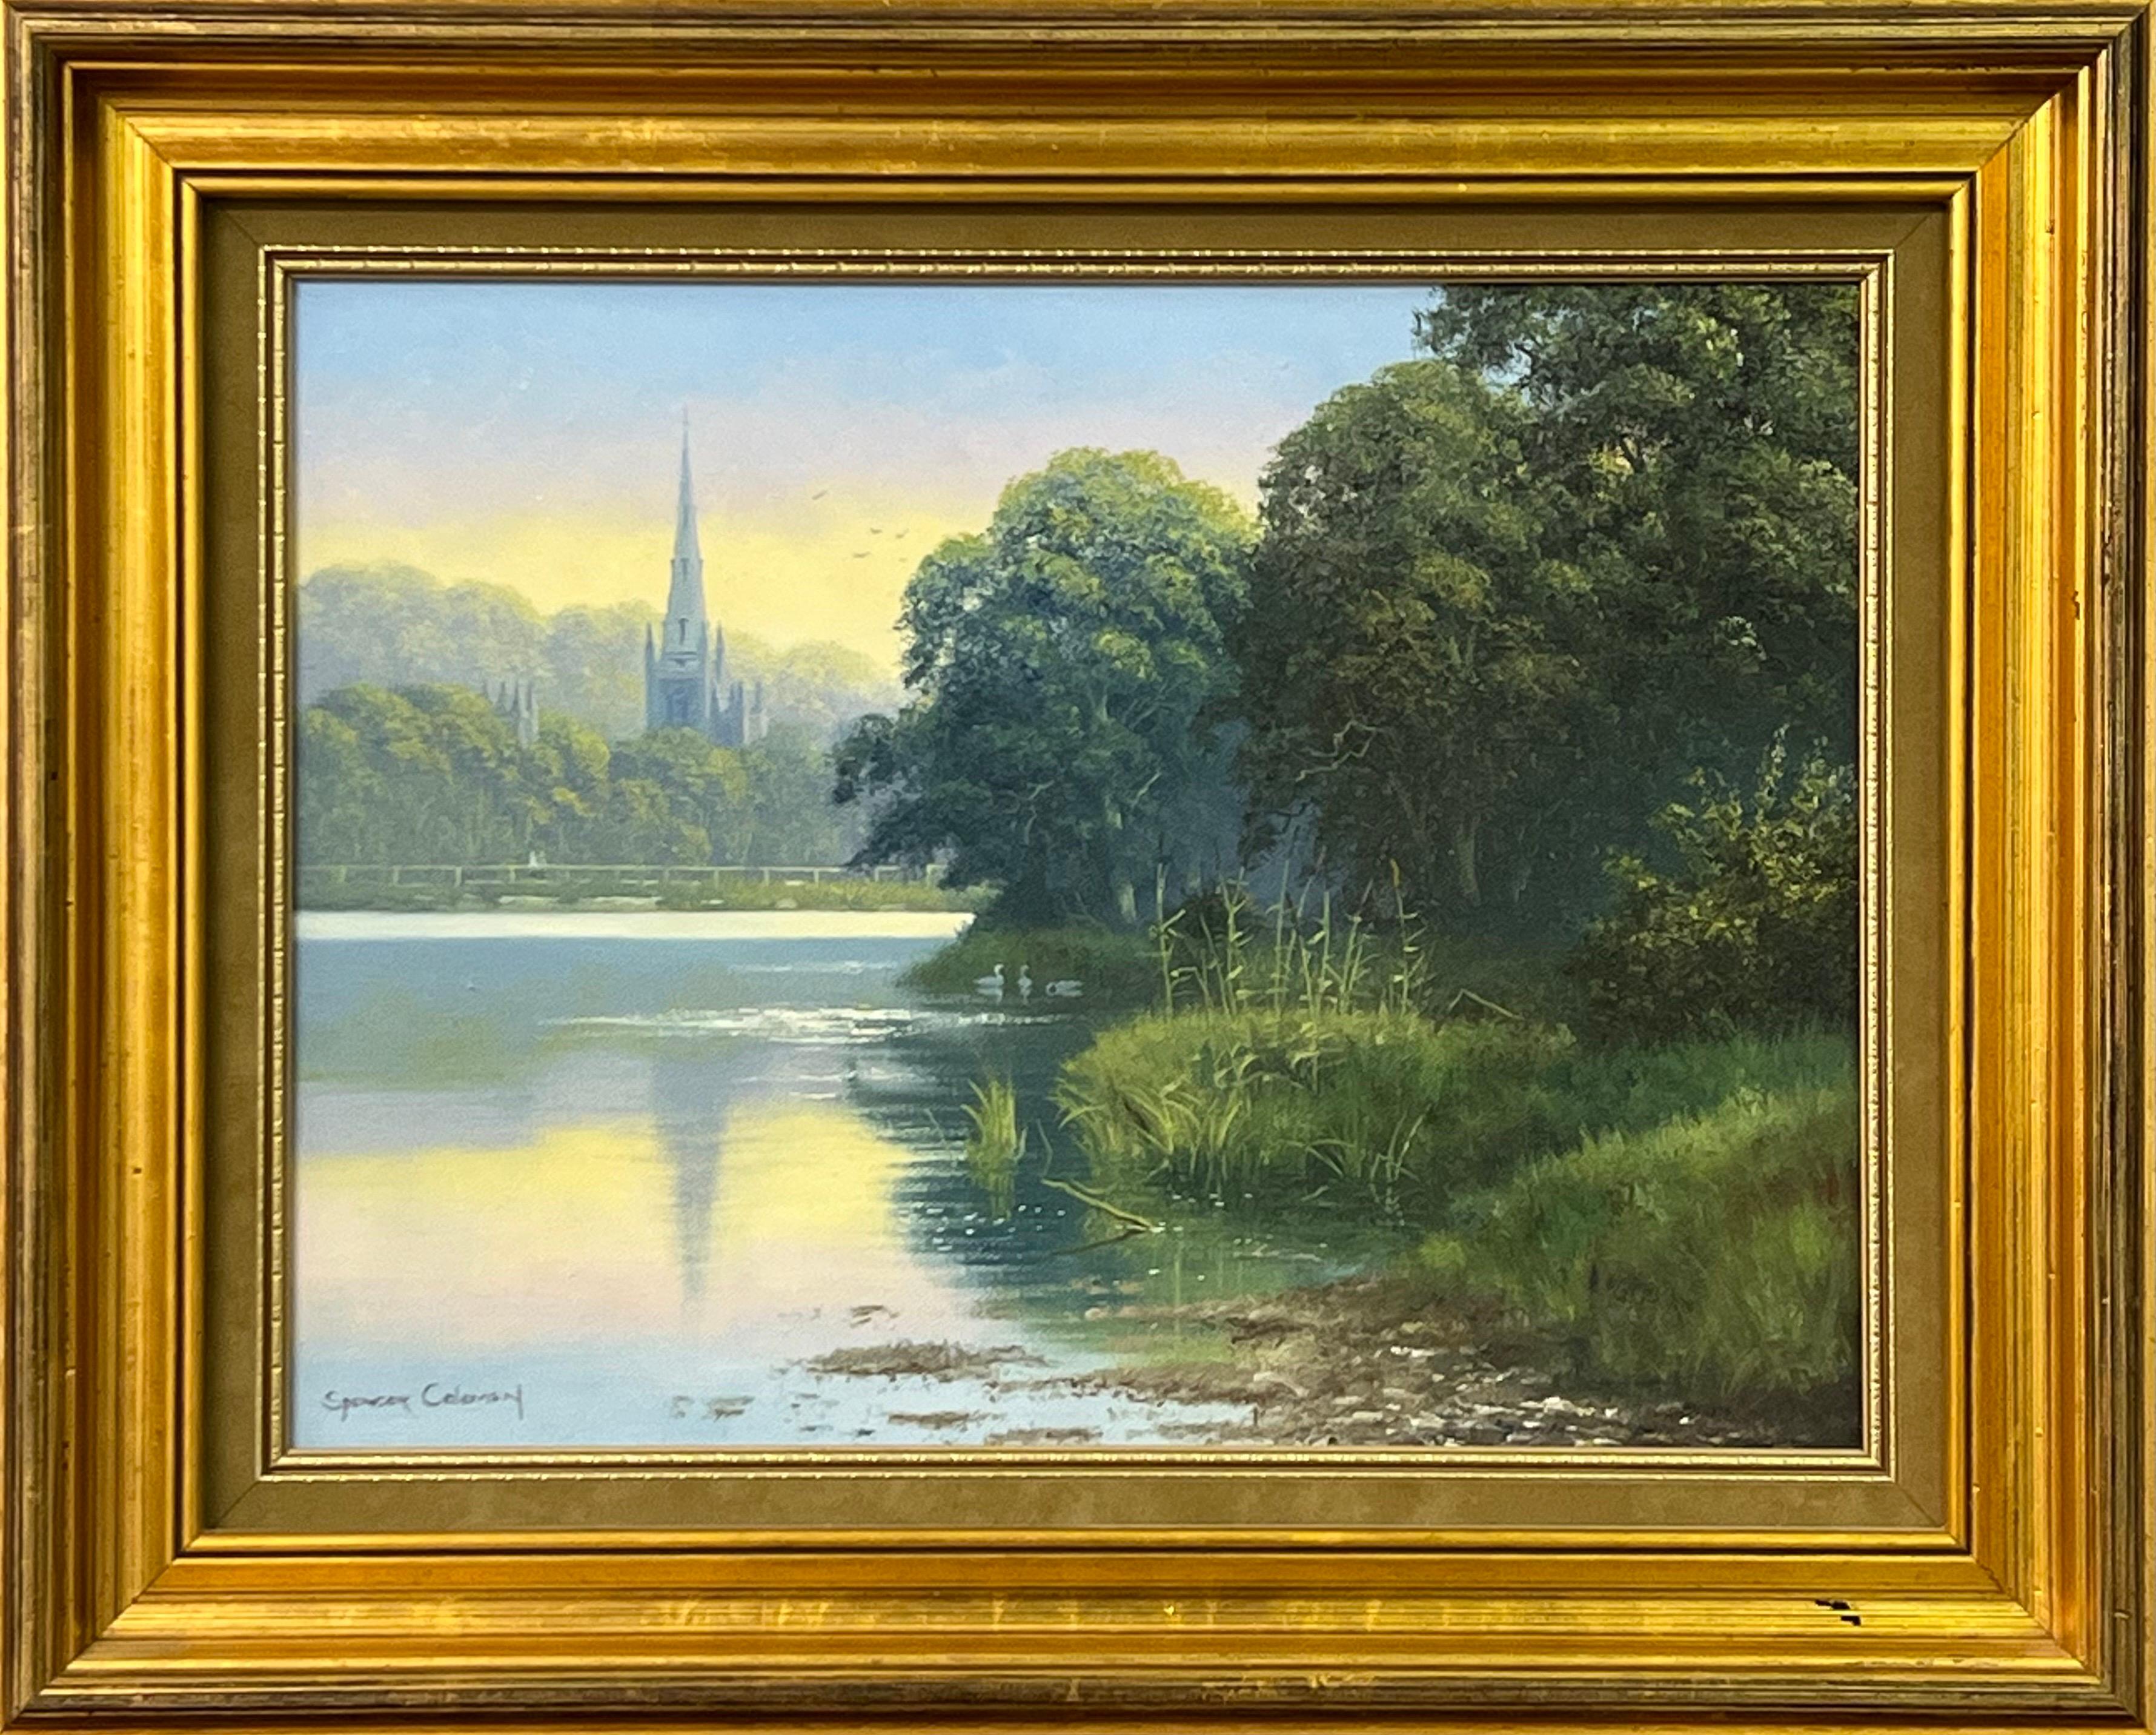 Painting of Rural Irish Countryside Scene with Swan Lake & Church Reflections